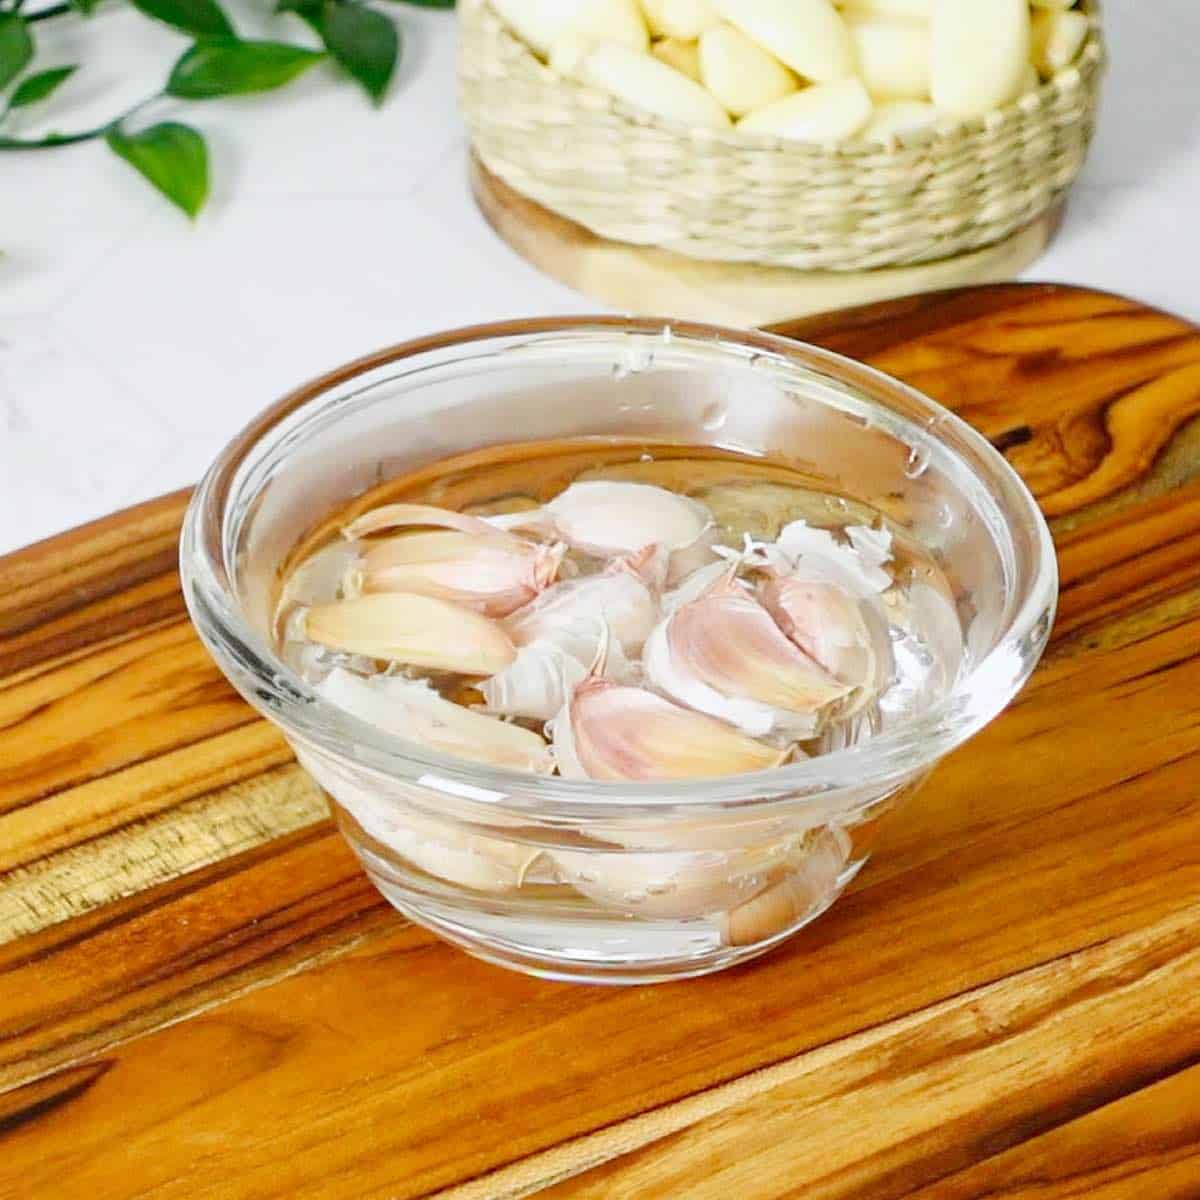 Unpeeled garlic cloves soaking in a bowl filled with warm water.